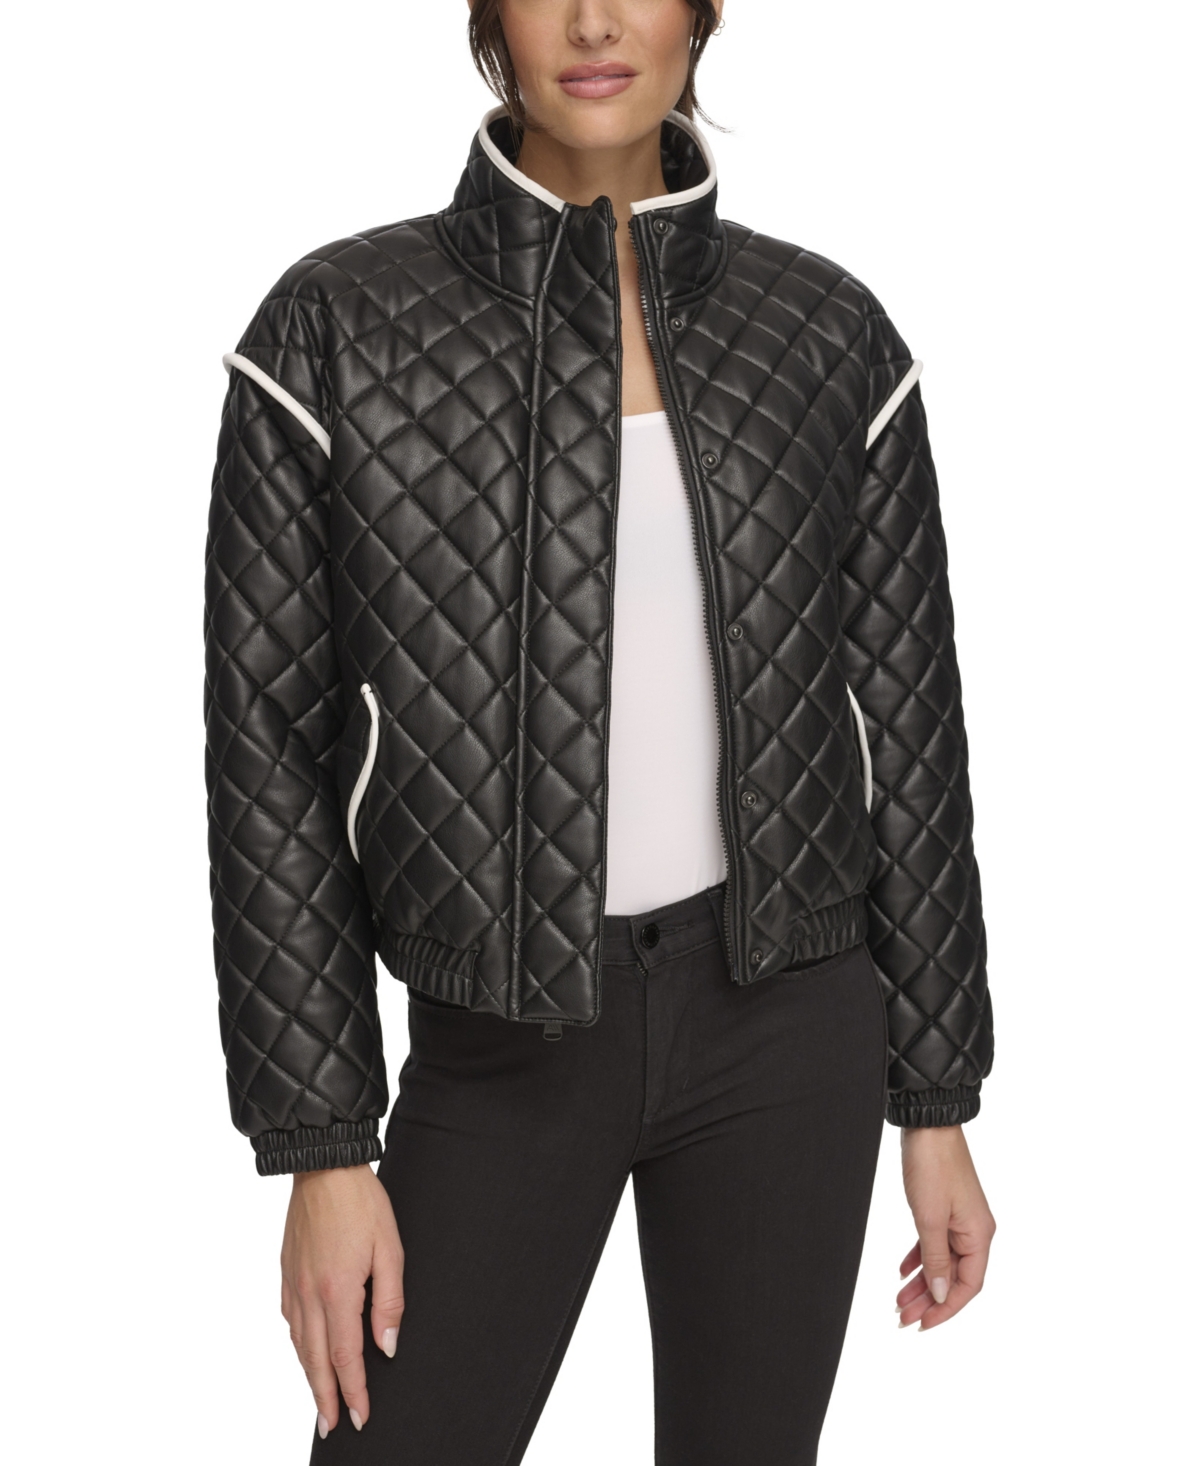 Women's Quilted Faux Leather Bomber Jacket With Contrast Trim - Black